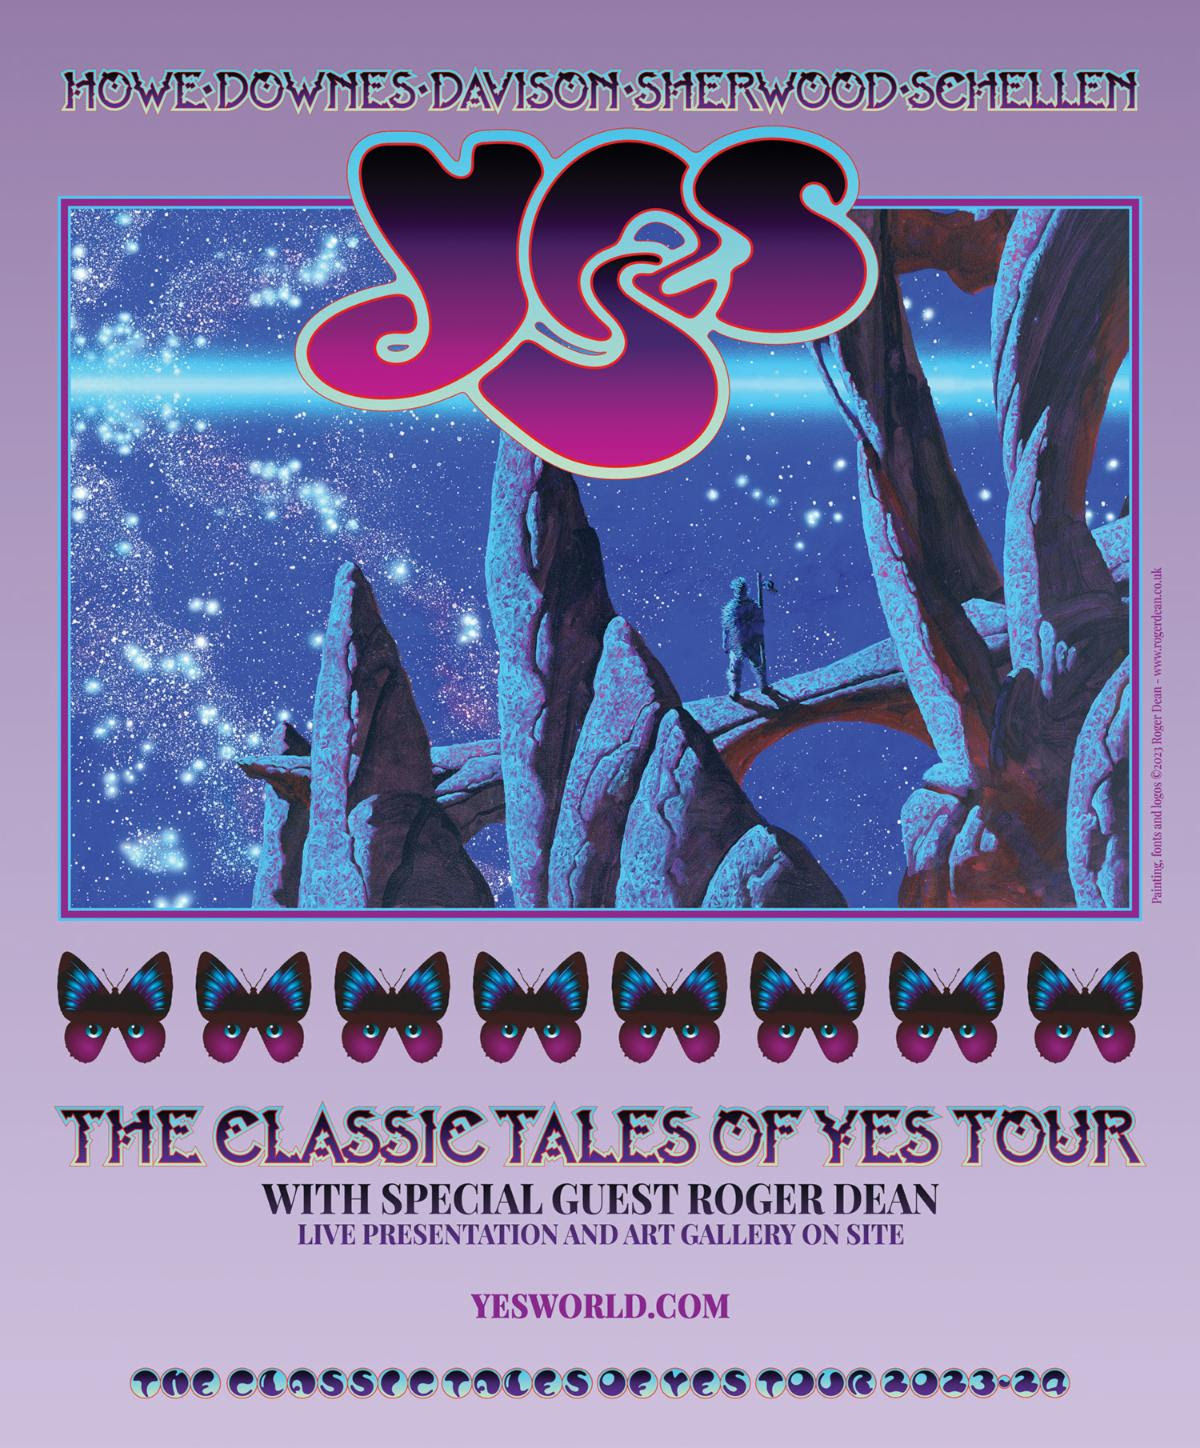 YES on tour